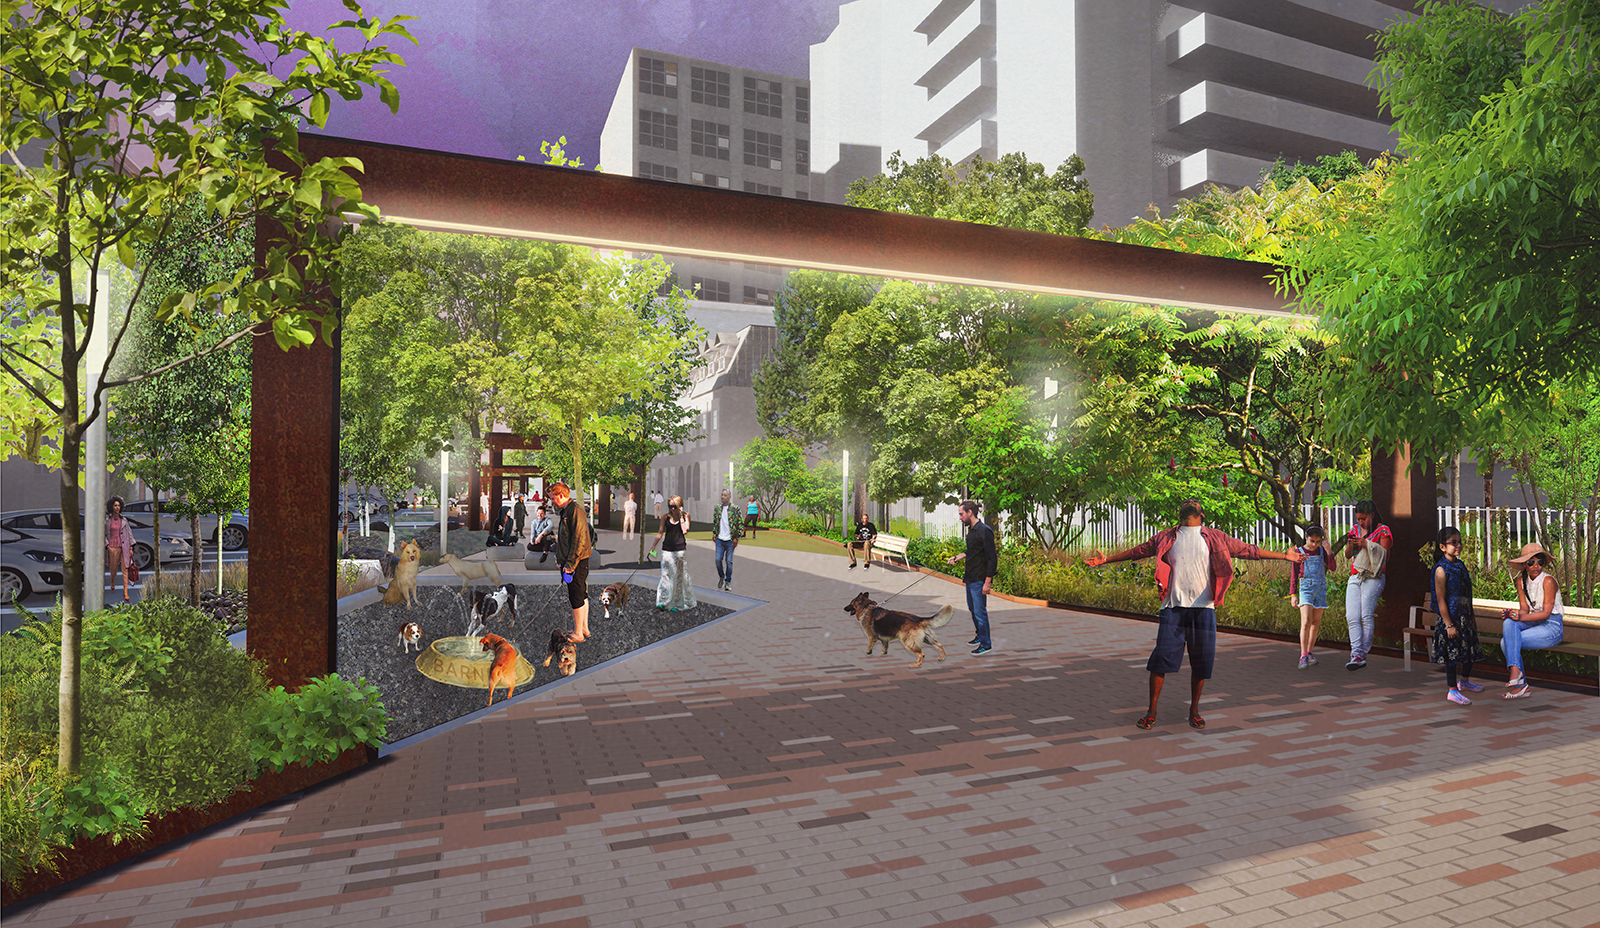 This rendering is a view from the South side of Norman Jewison Park. This view shows the lighting produced by the archways, it shows the dog relief area, it shows what the planting might look like.